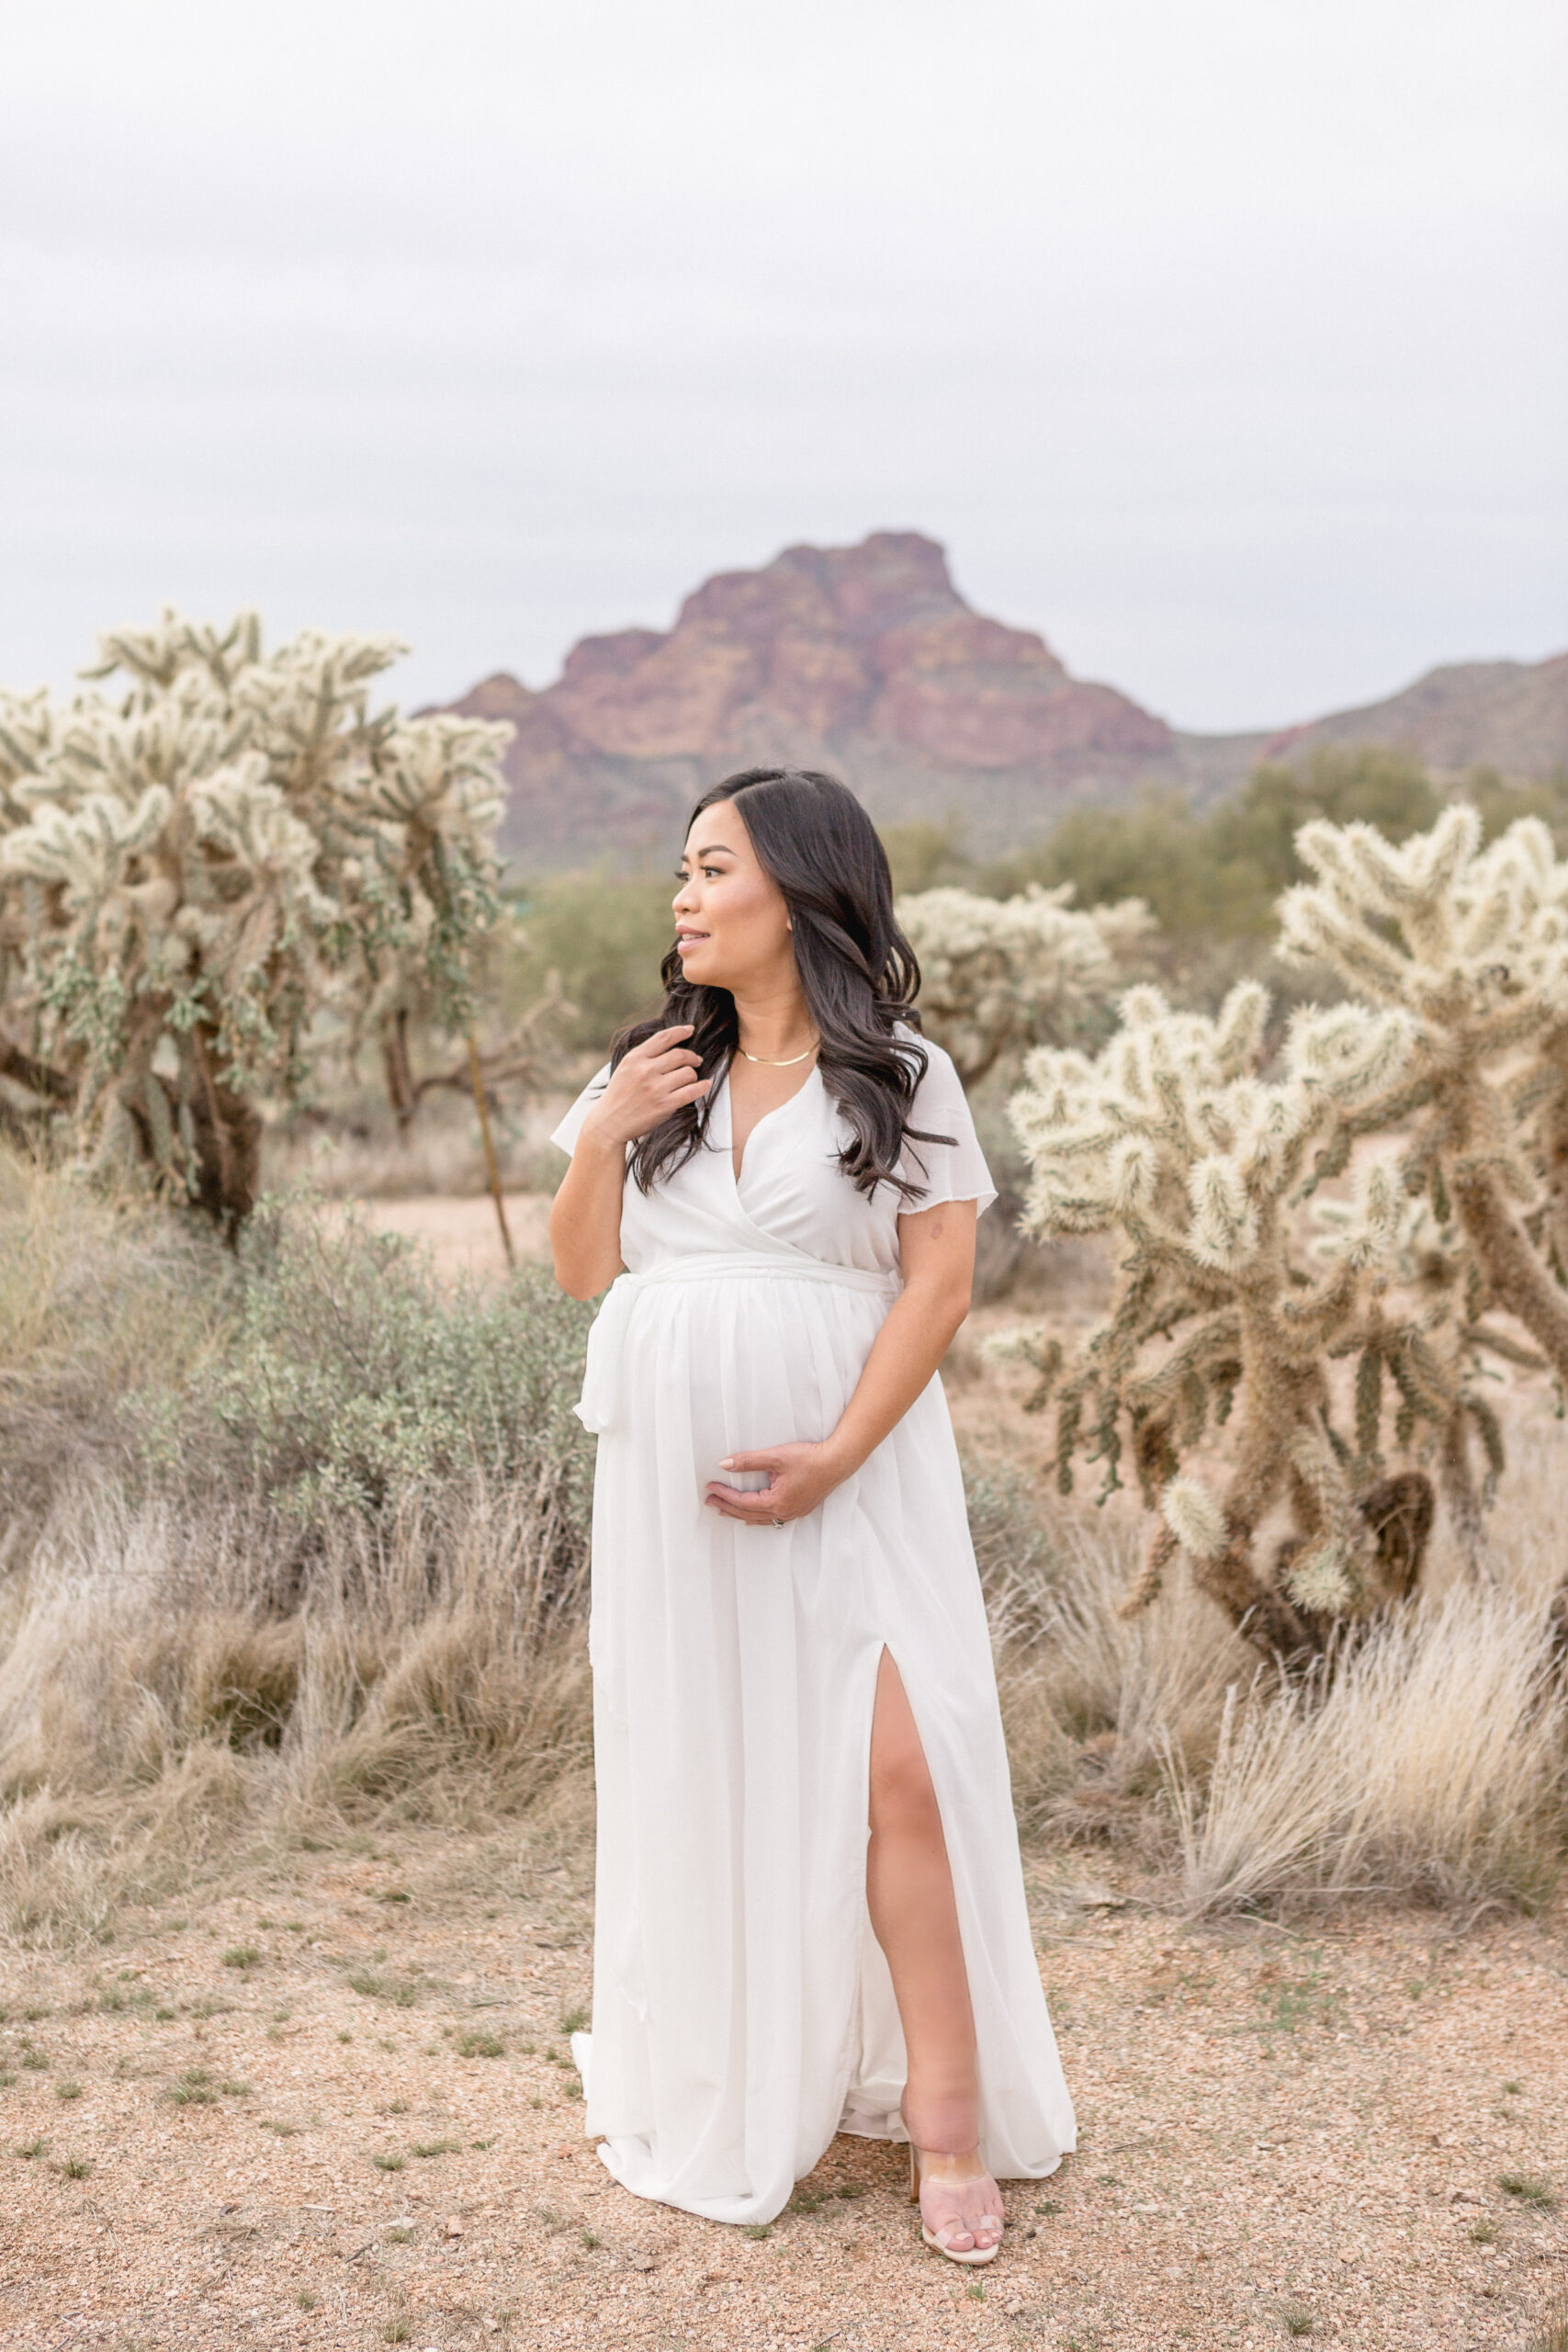 pregnant mom standing in beautiful desert scenery, gently cradling her round pregnant belly